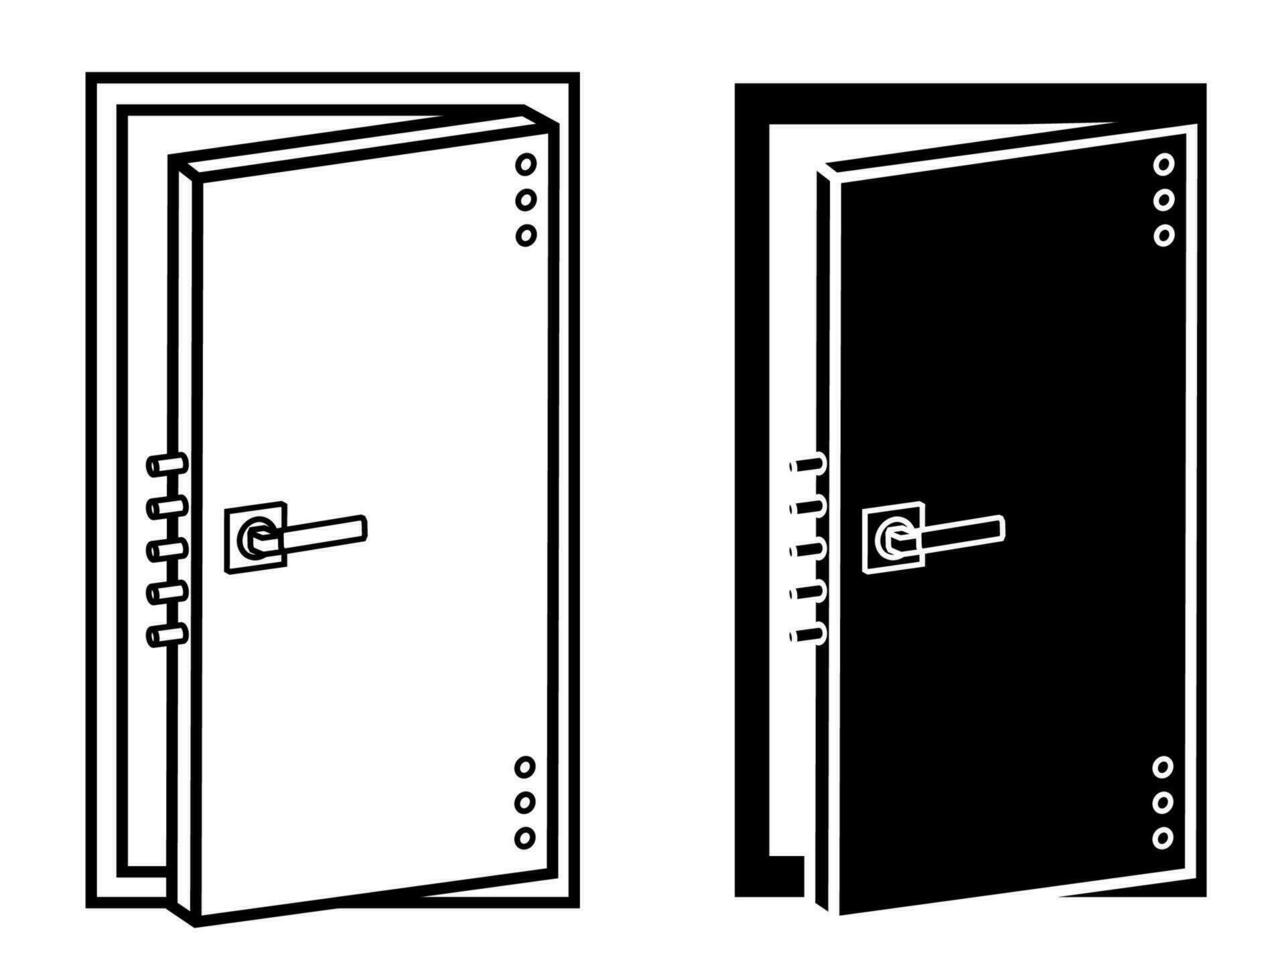 open reliable door icon of bomb shelter or bank. Safe storage and shelter. Highest level of security. Vector